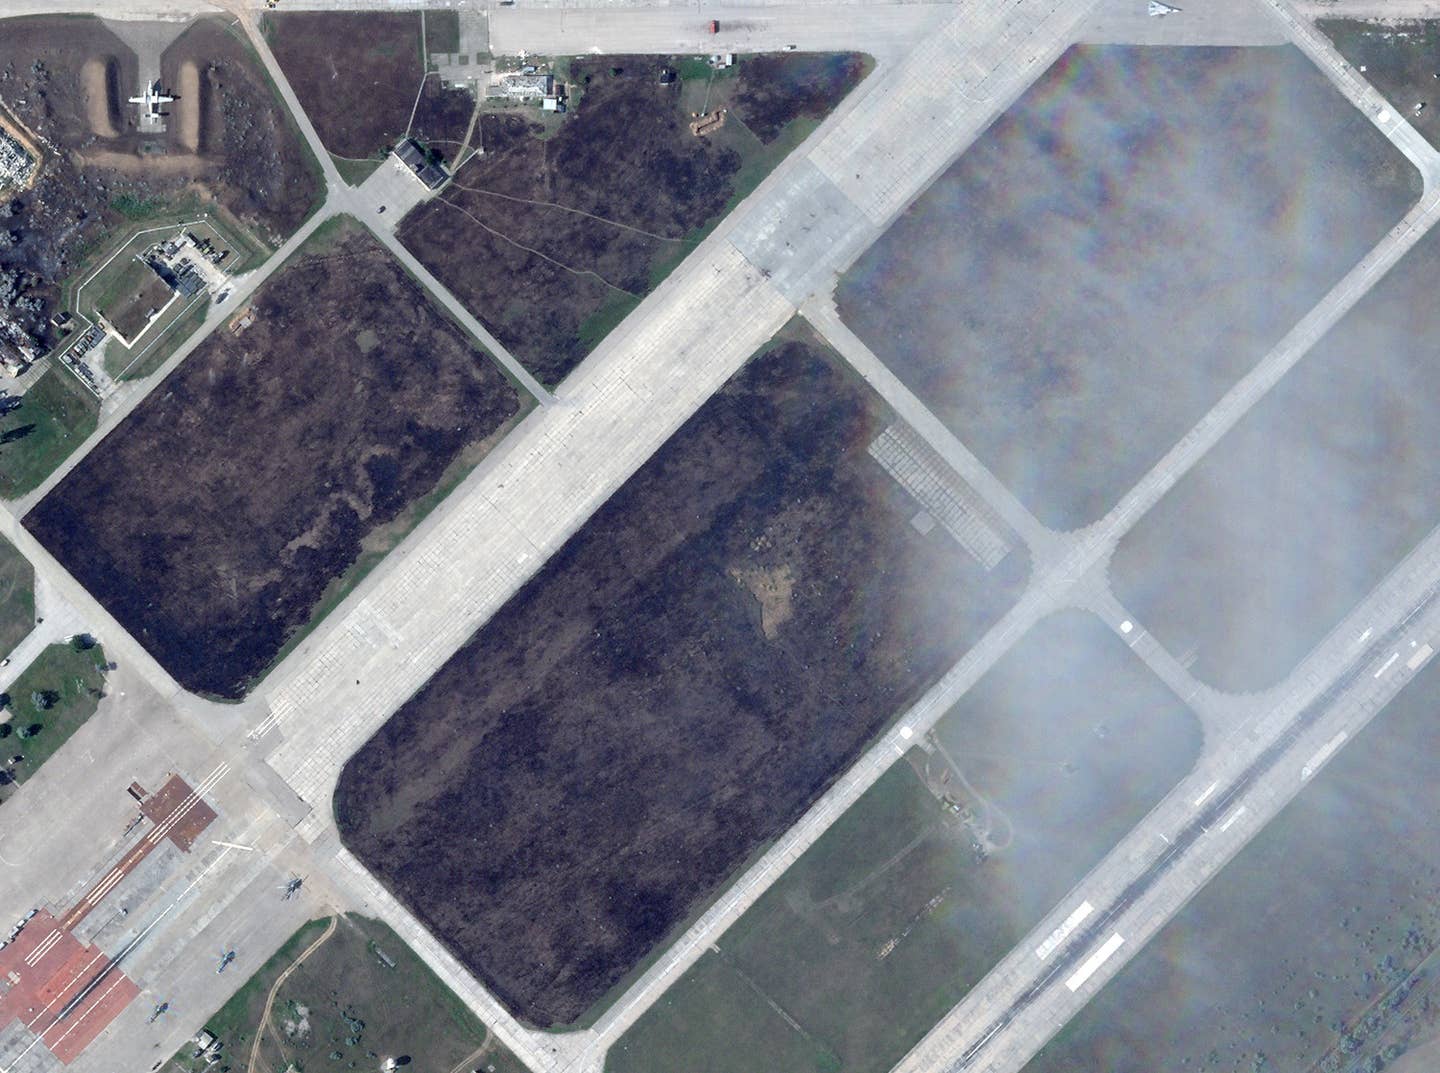 A similar look at the scorched areas south of the apron. <em>PHOTO © 2022 PLANET LABS INC. ALL RIGHTS RESERVED. REPRINTED BY PERMISSION</em>